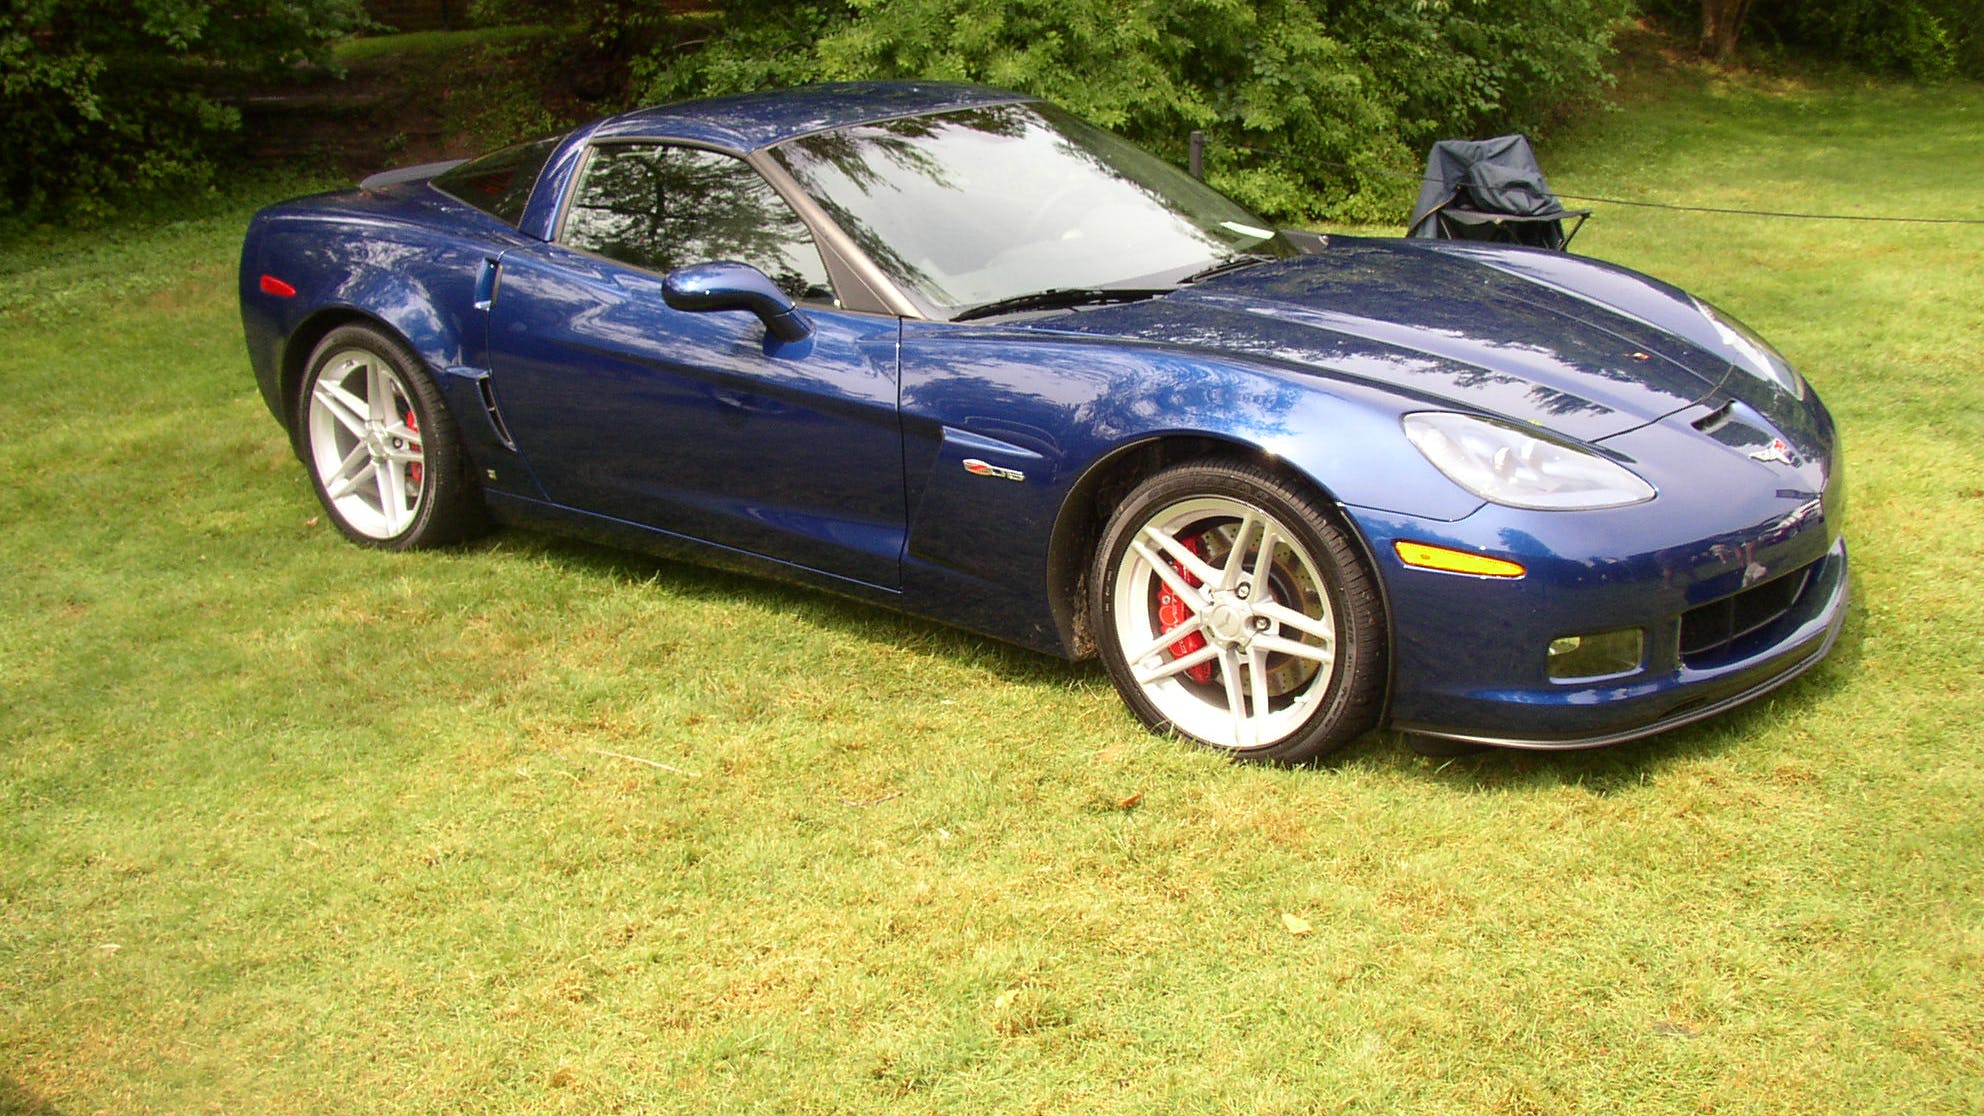 2005 Chevrolet Corvette Base | Hagerty Valuation Tools